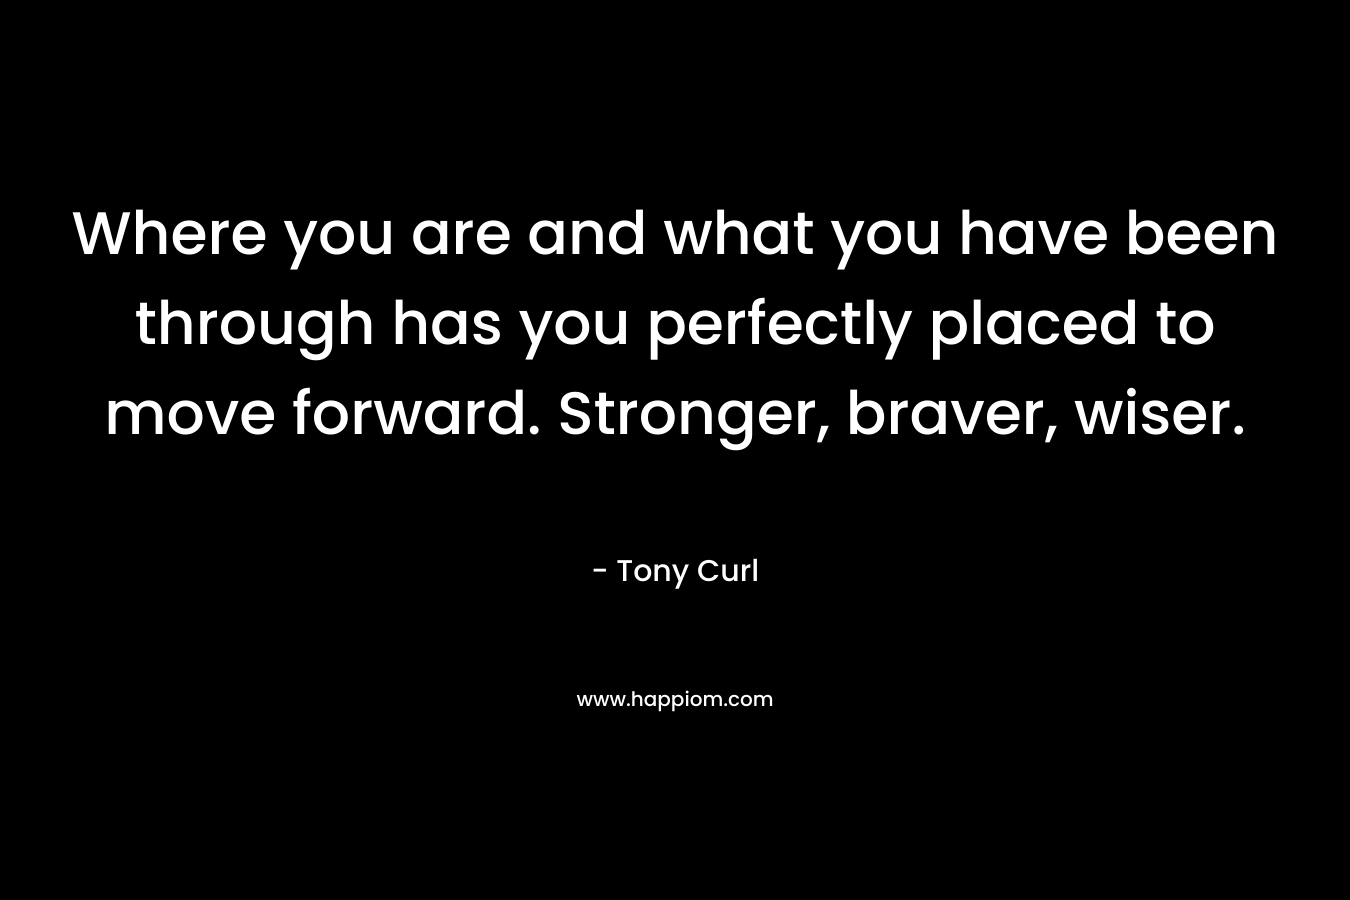 Where you are and what you have been through has you perfectly placed to move forward. Stronger, braver, wiser.